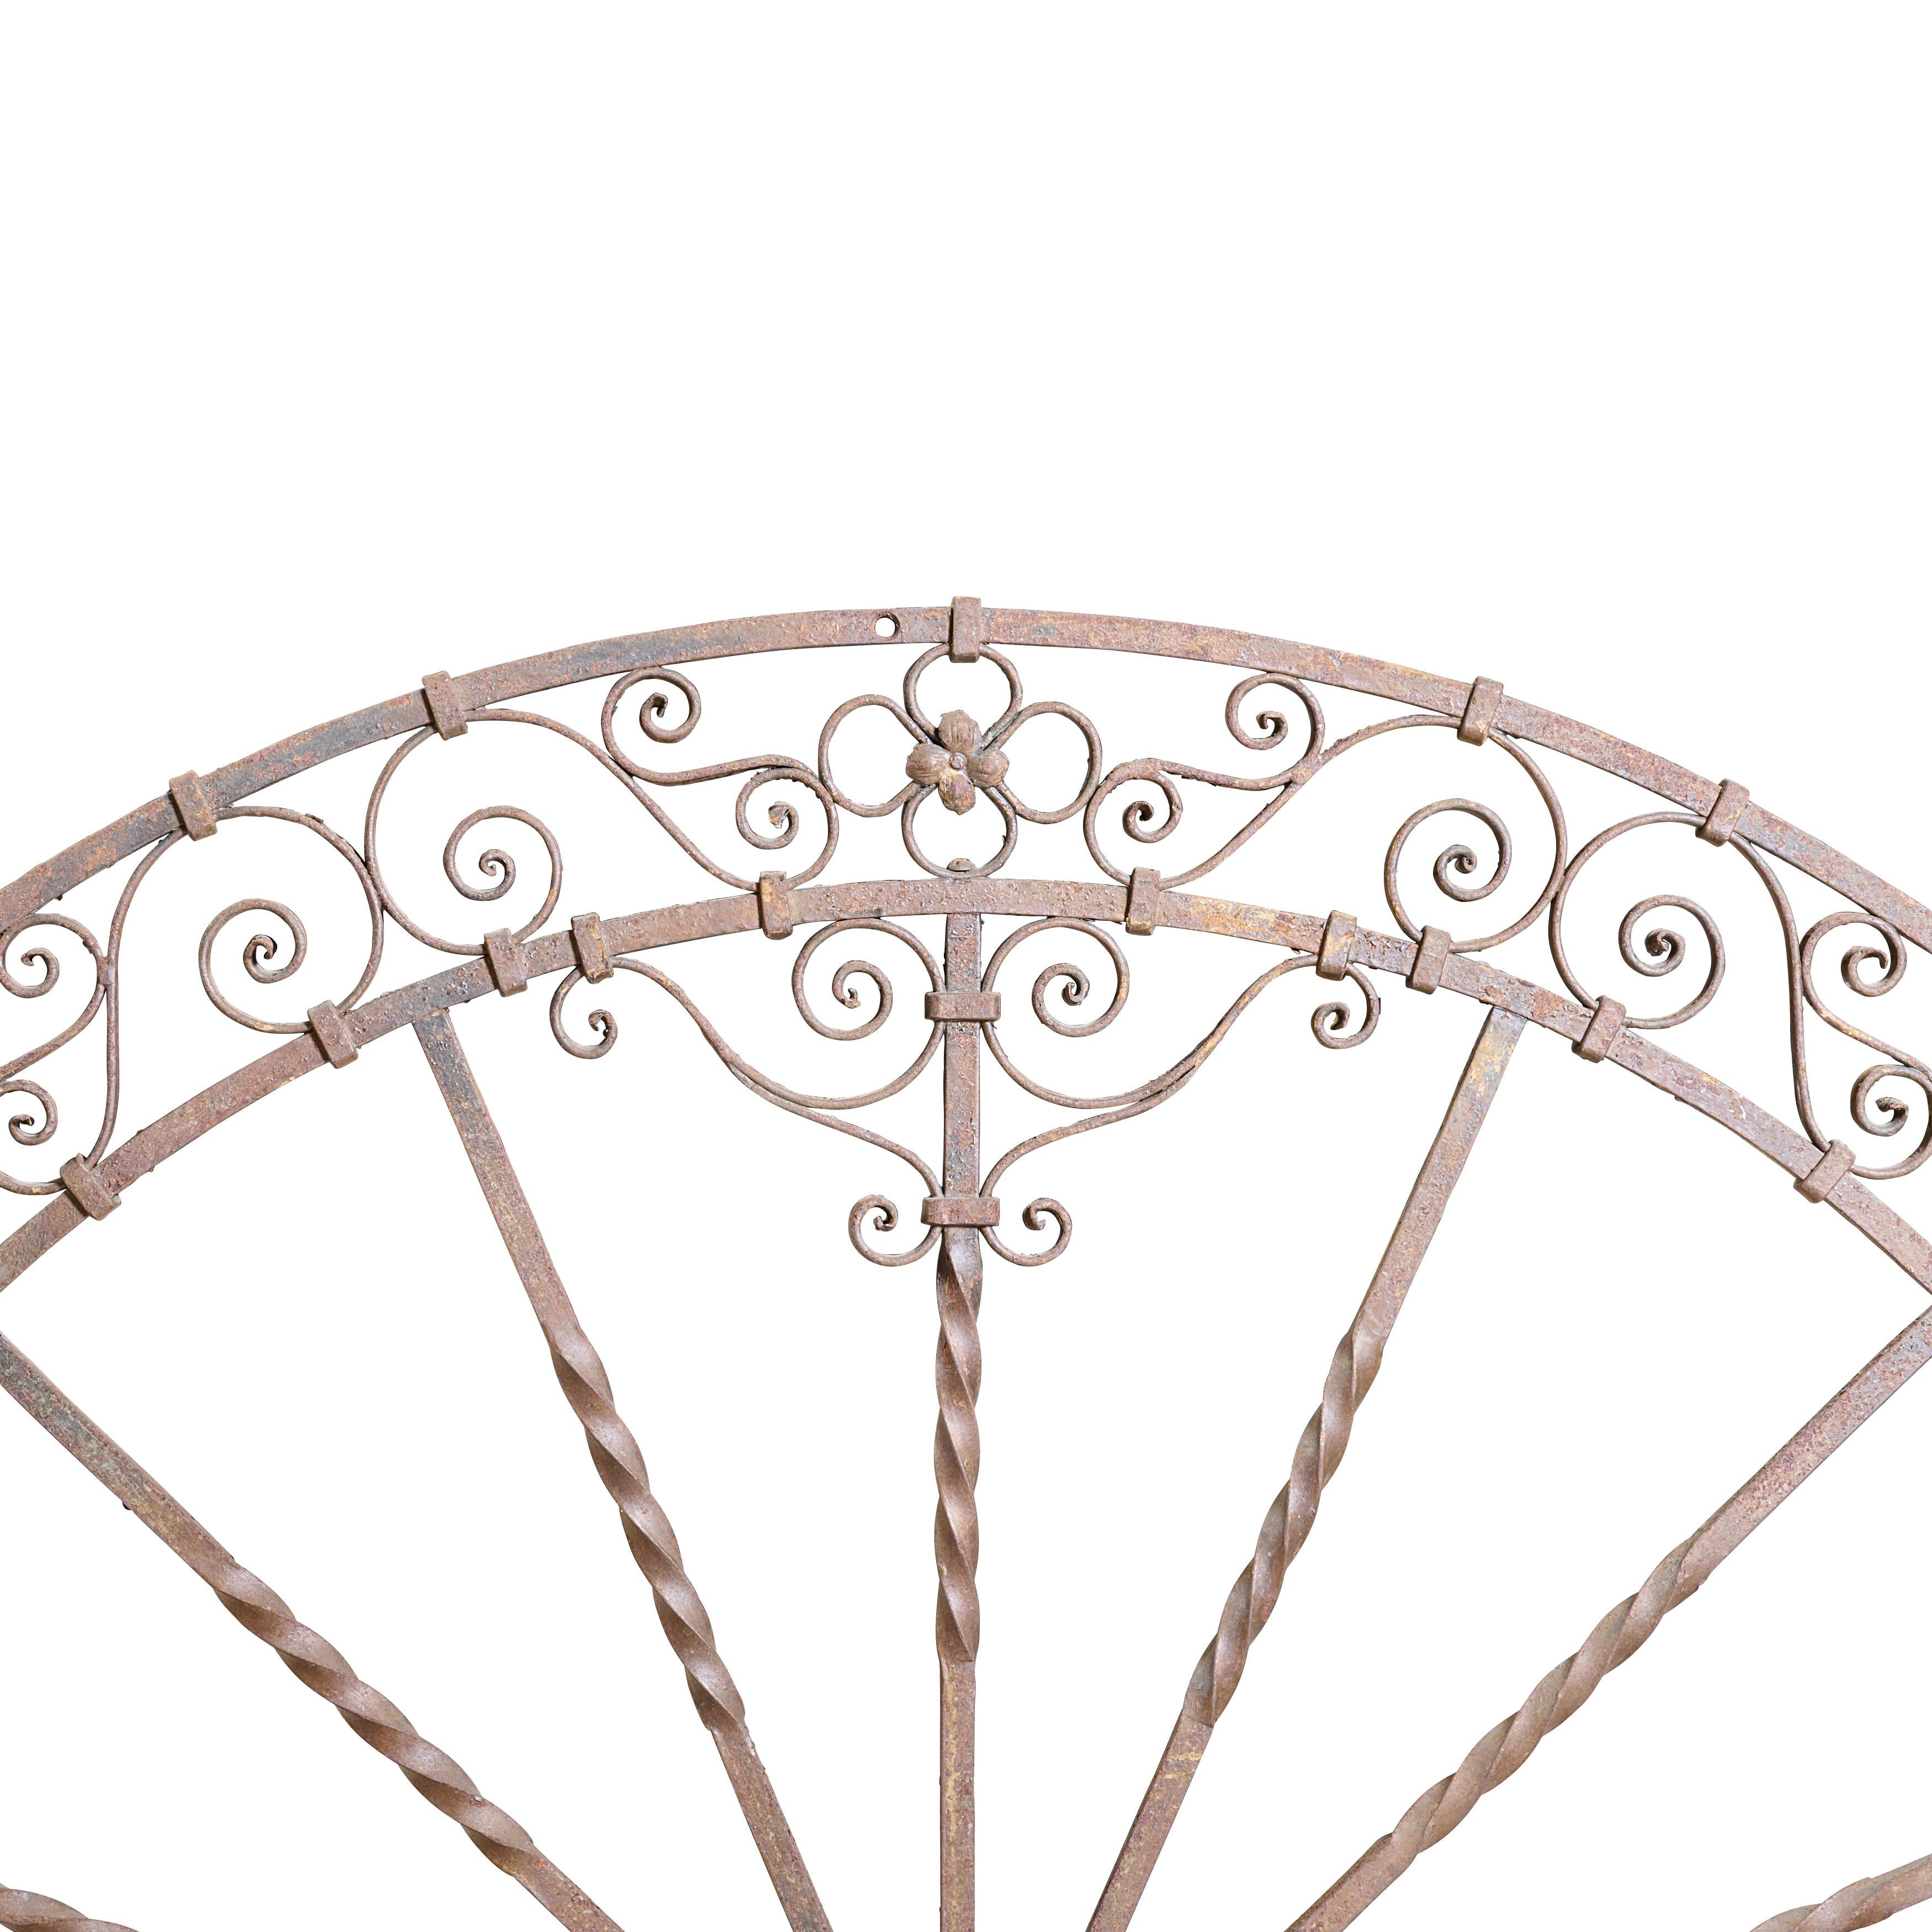 Decorative wrought iron grill.

